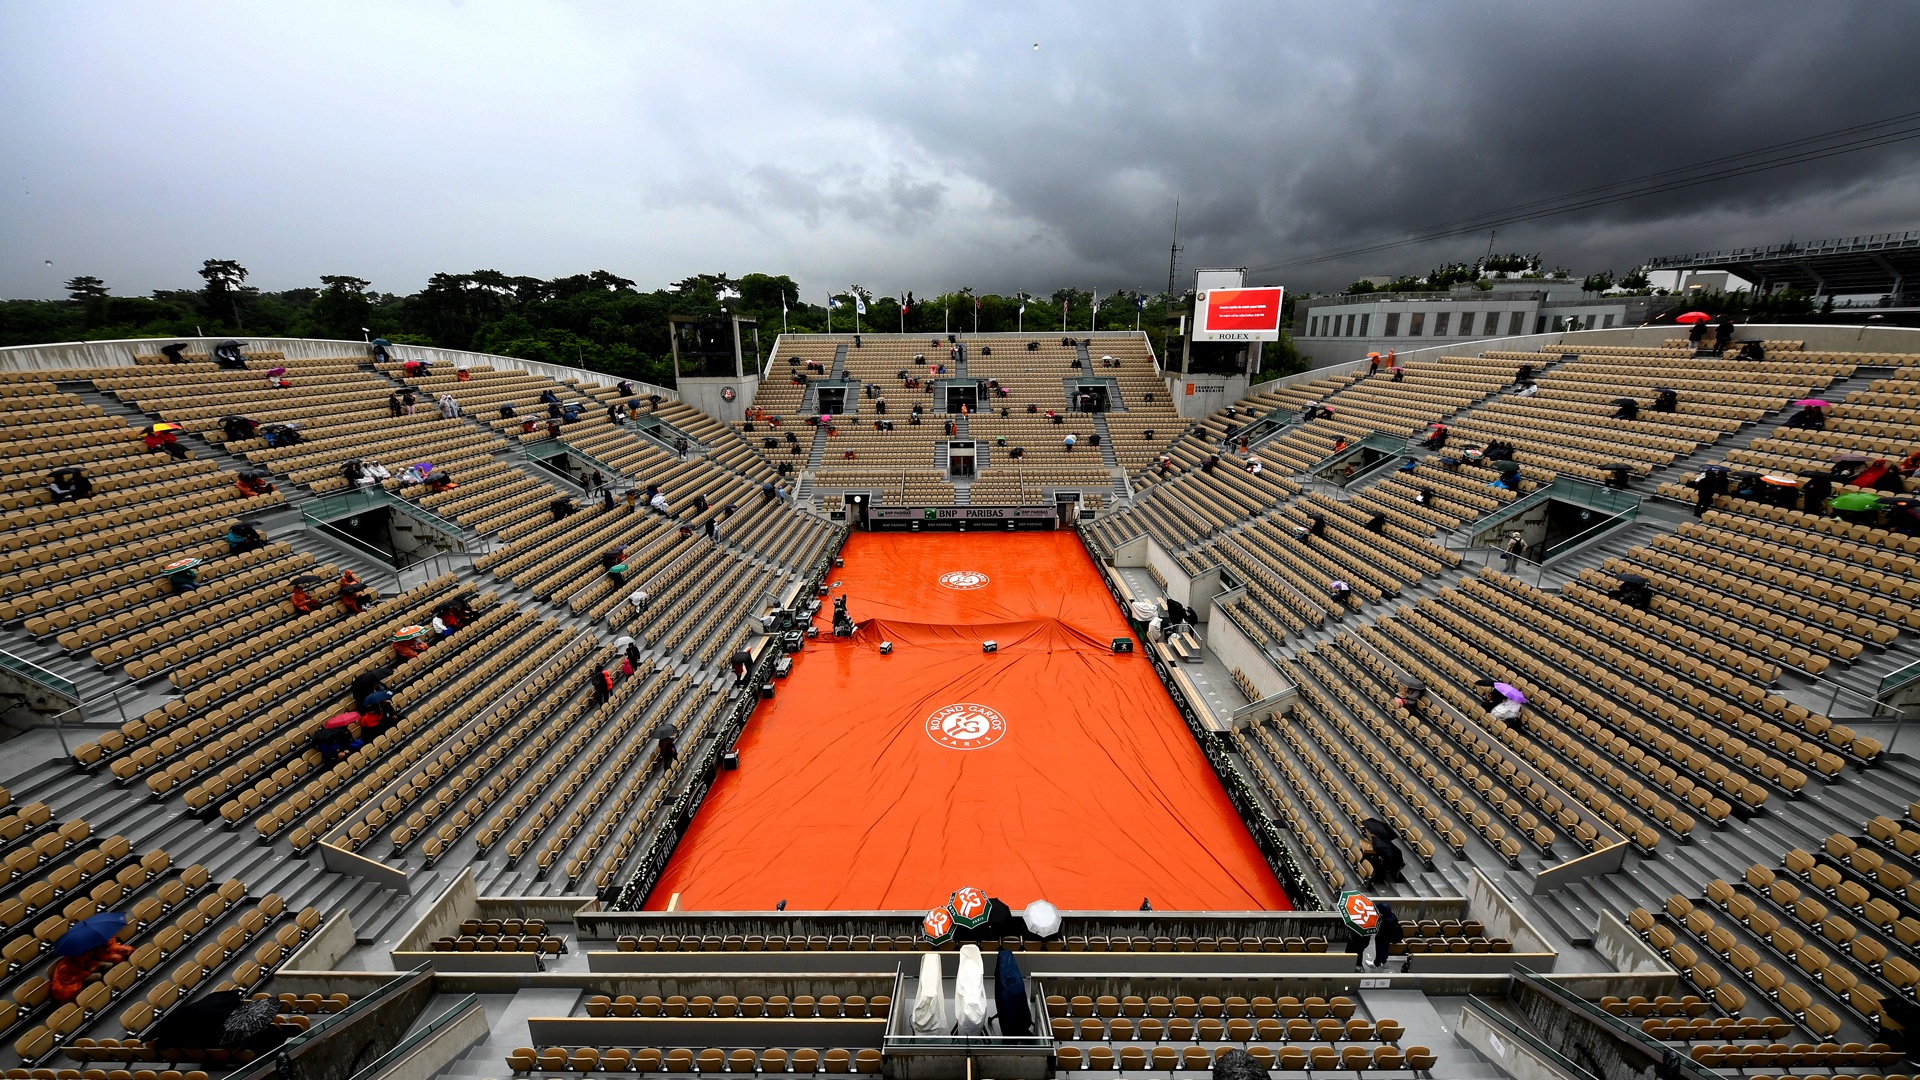 PARIS, FRANCE - JUNE 05: A general view inside Court Suzanne Lenglen as the court is covered during a rain delay during Day eleven of the 2019 French Open at Roland Garros on June 05, 2019 in Paris, France. (Photo by Clive Mason/Getty Images)